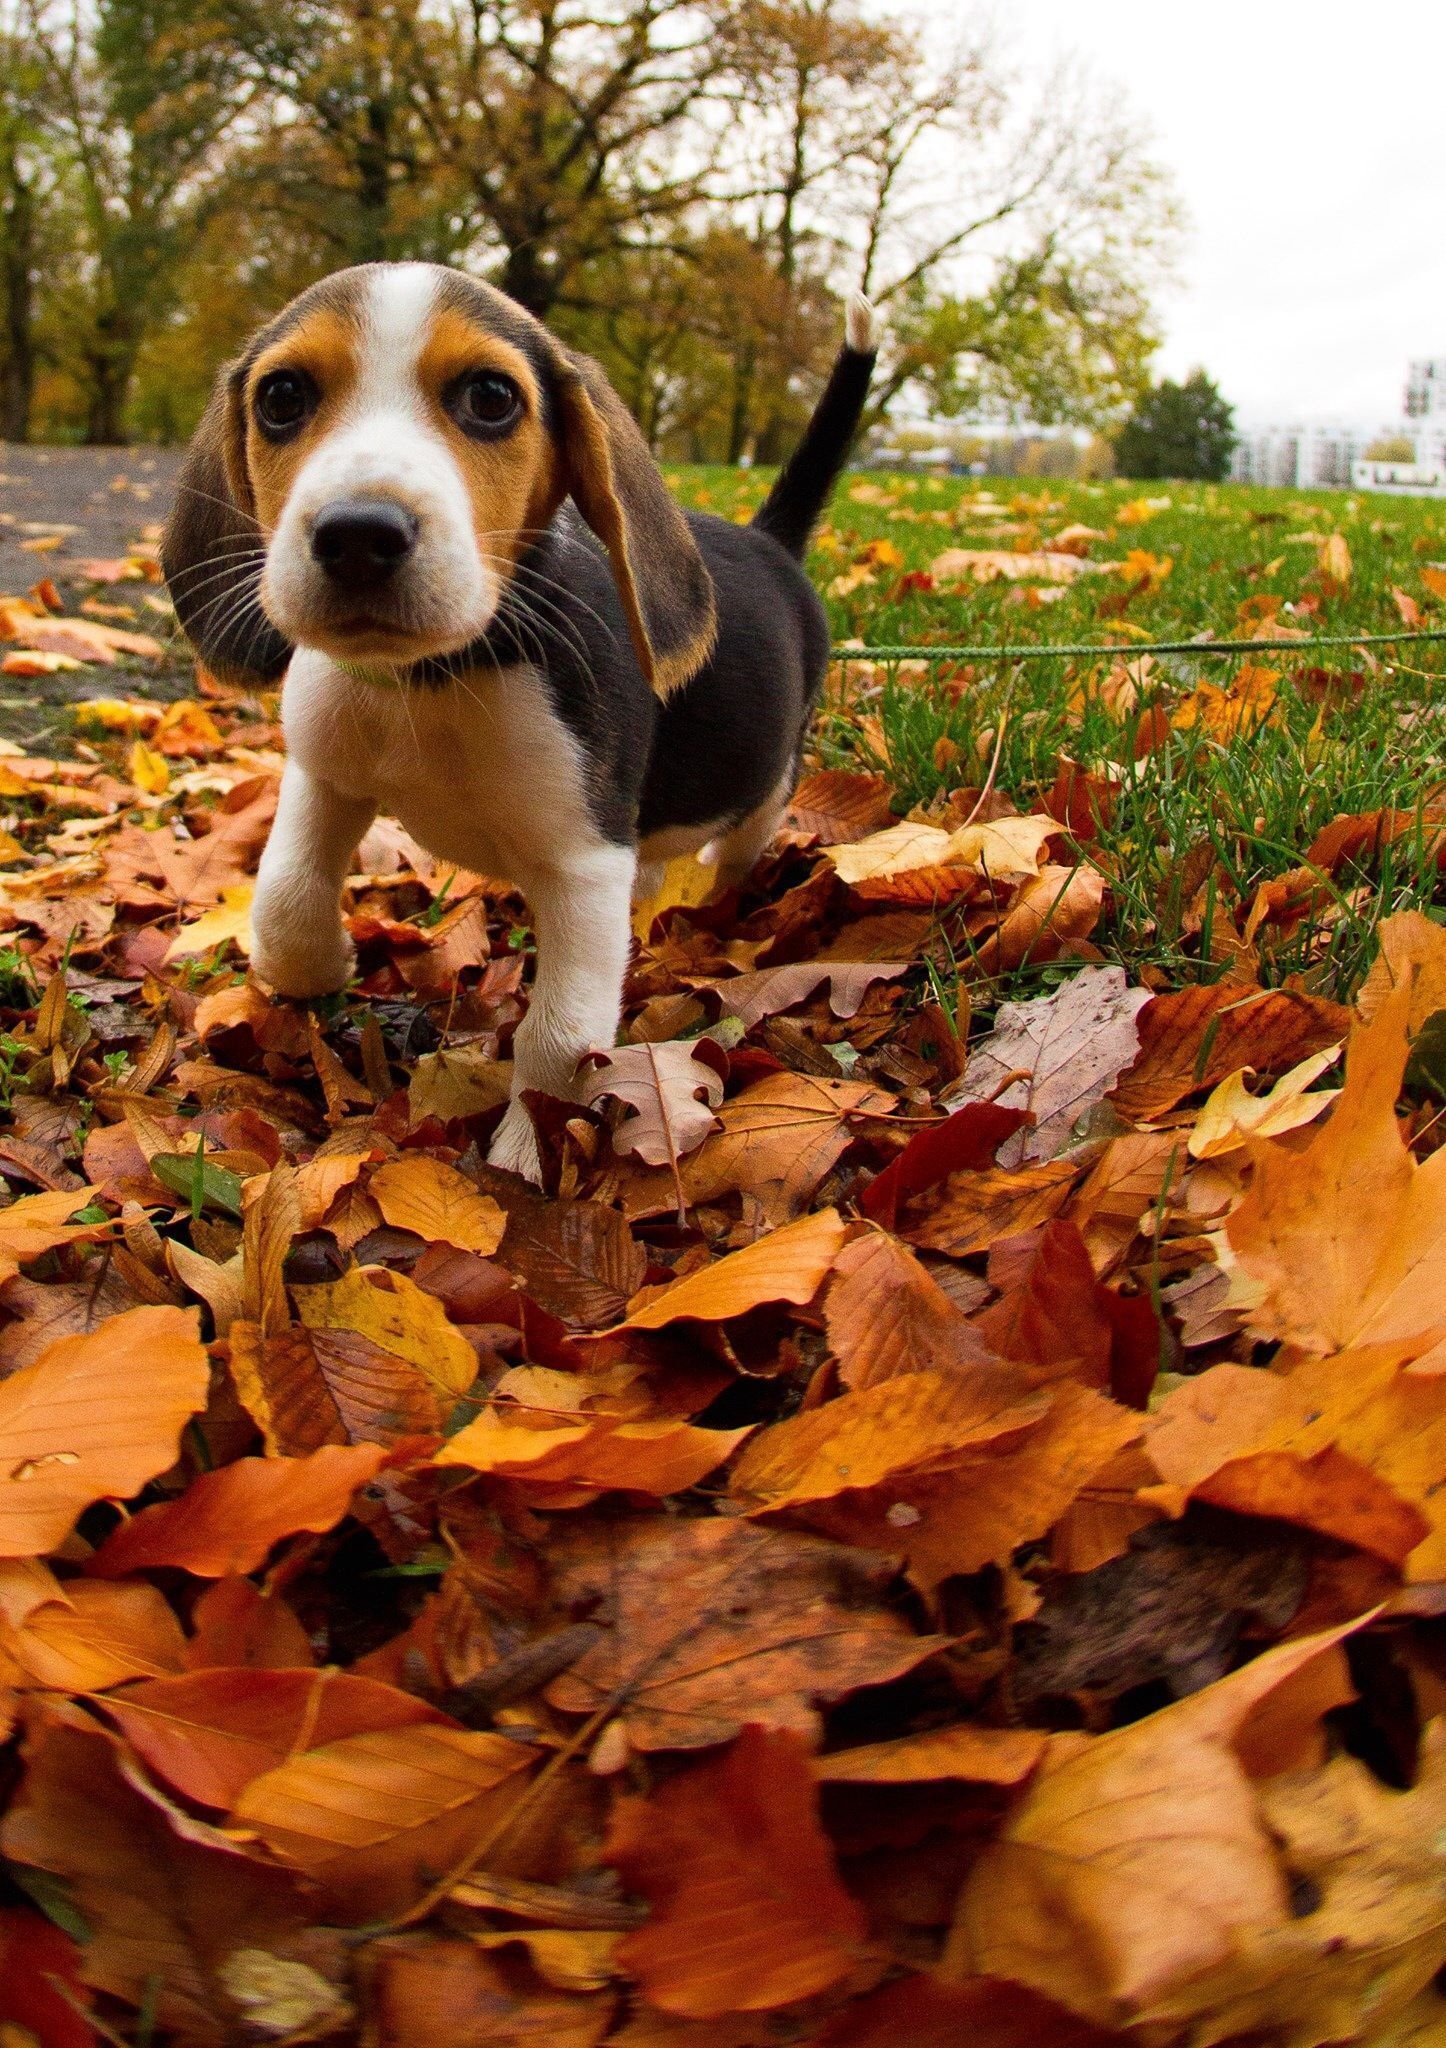 A Beagle walking on top of the pile of dried leaves at the park